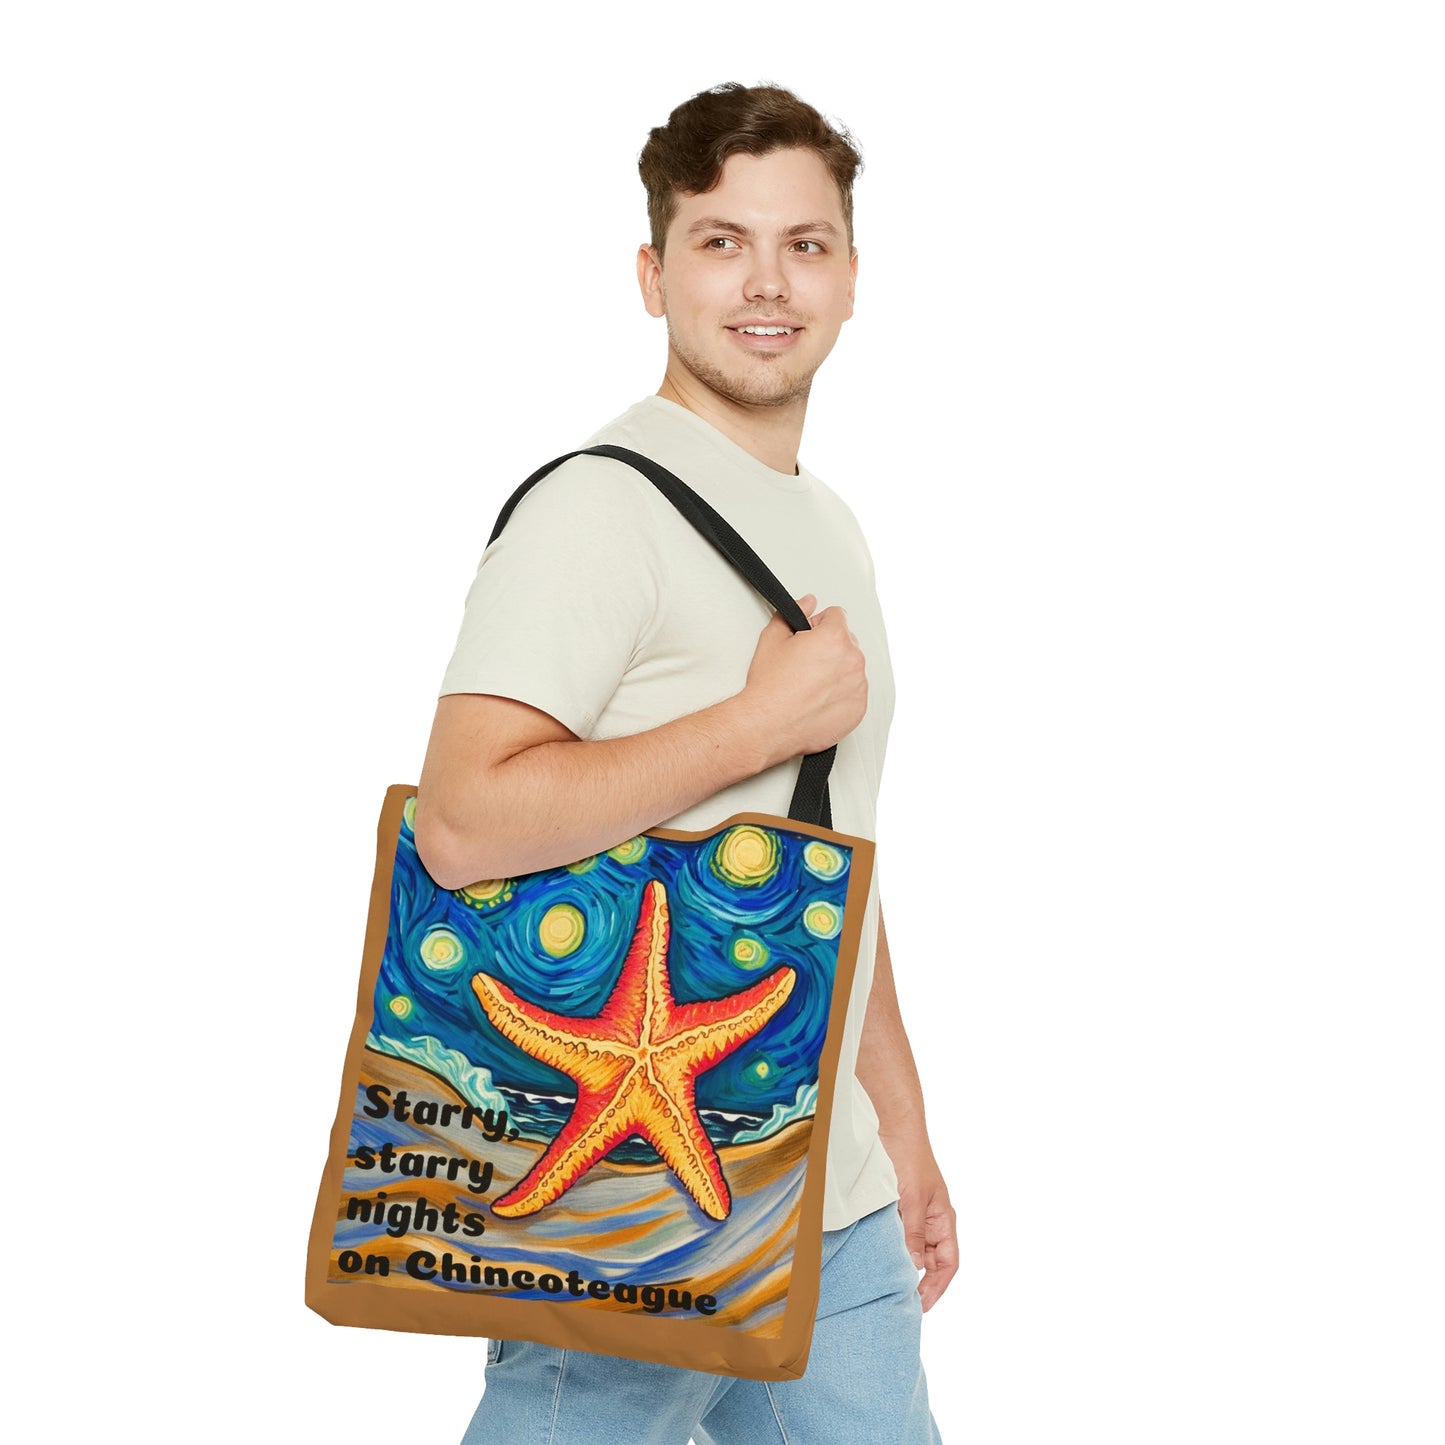 Starry, starry nights on Chincoteague tote bag